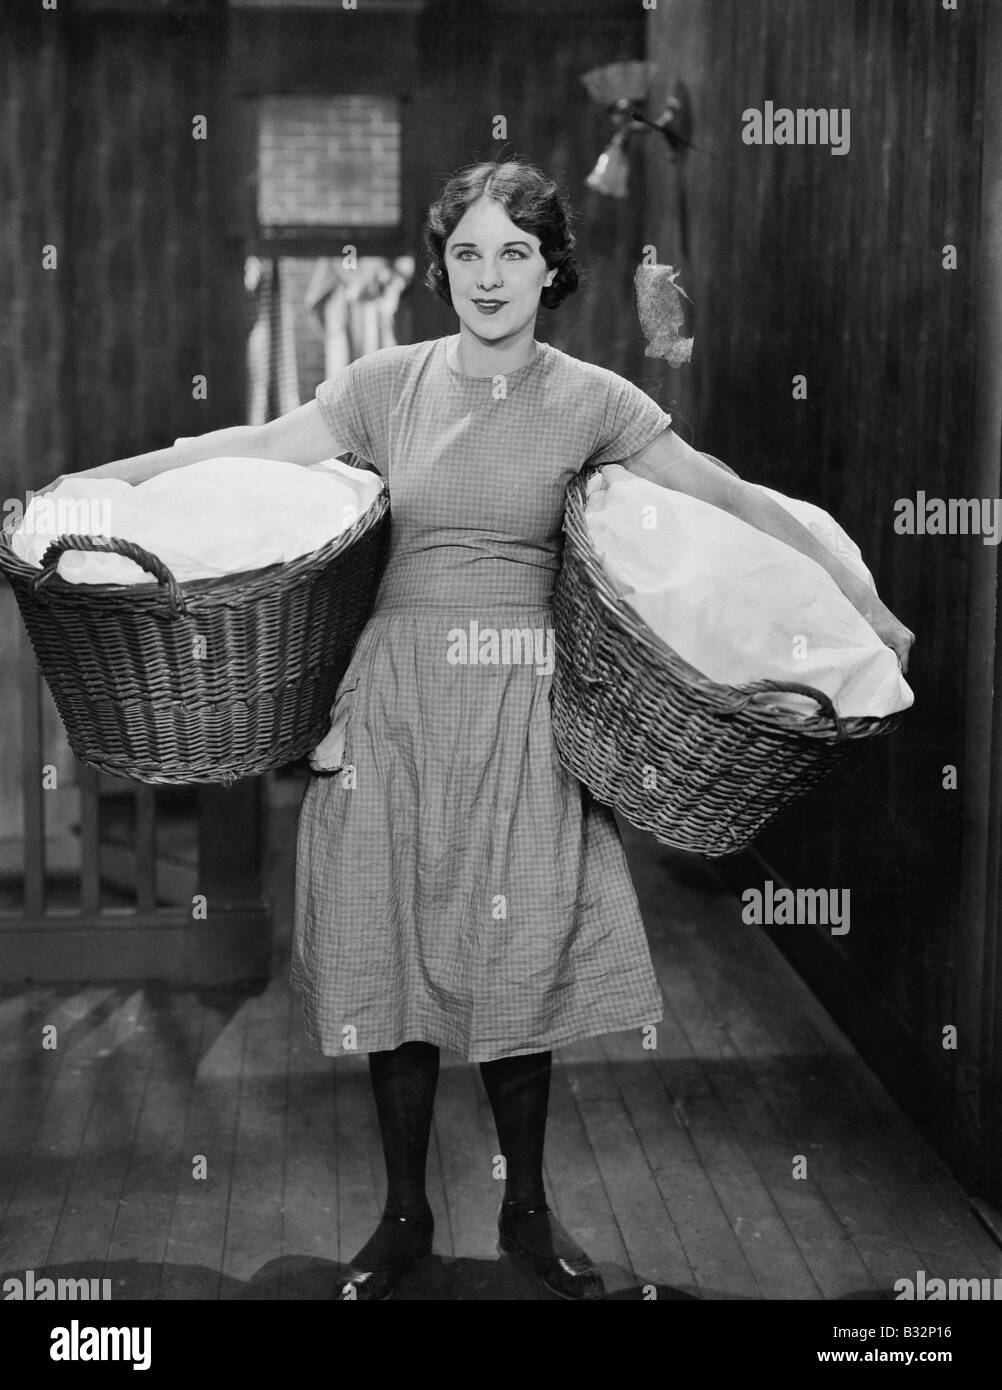 Woman carrying laundry baskets Stock Photo